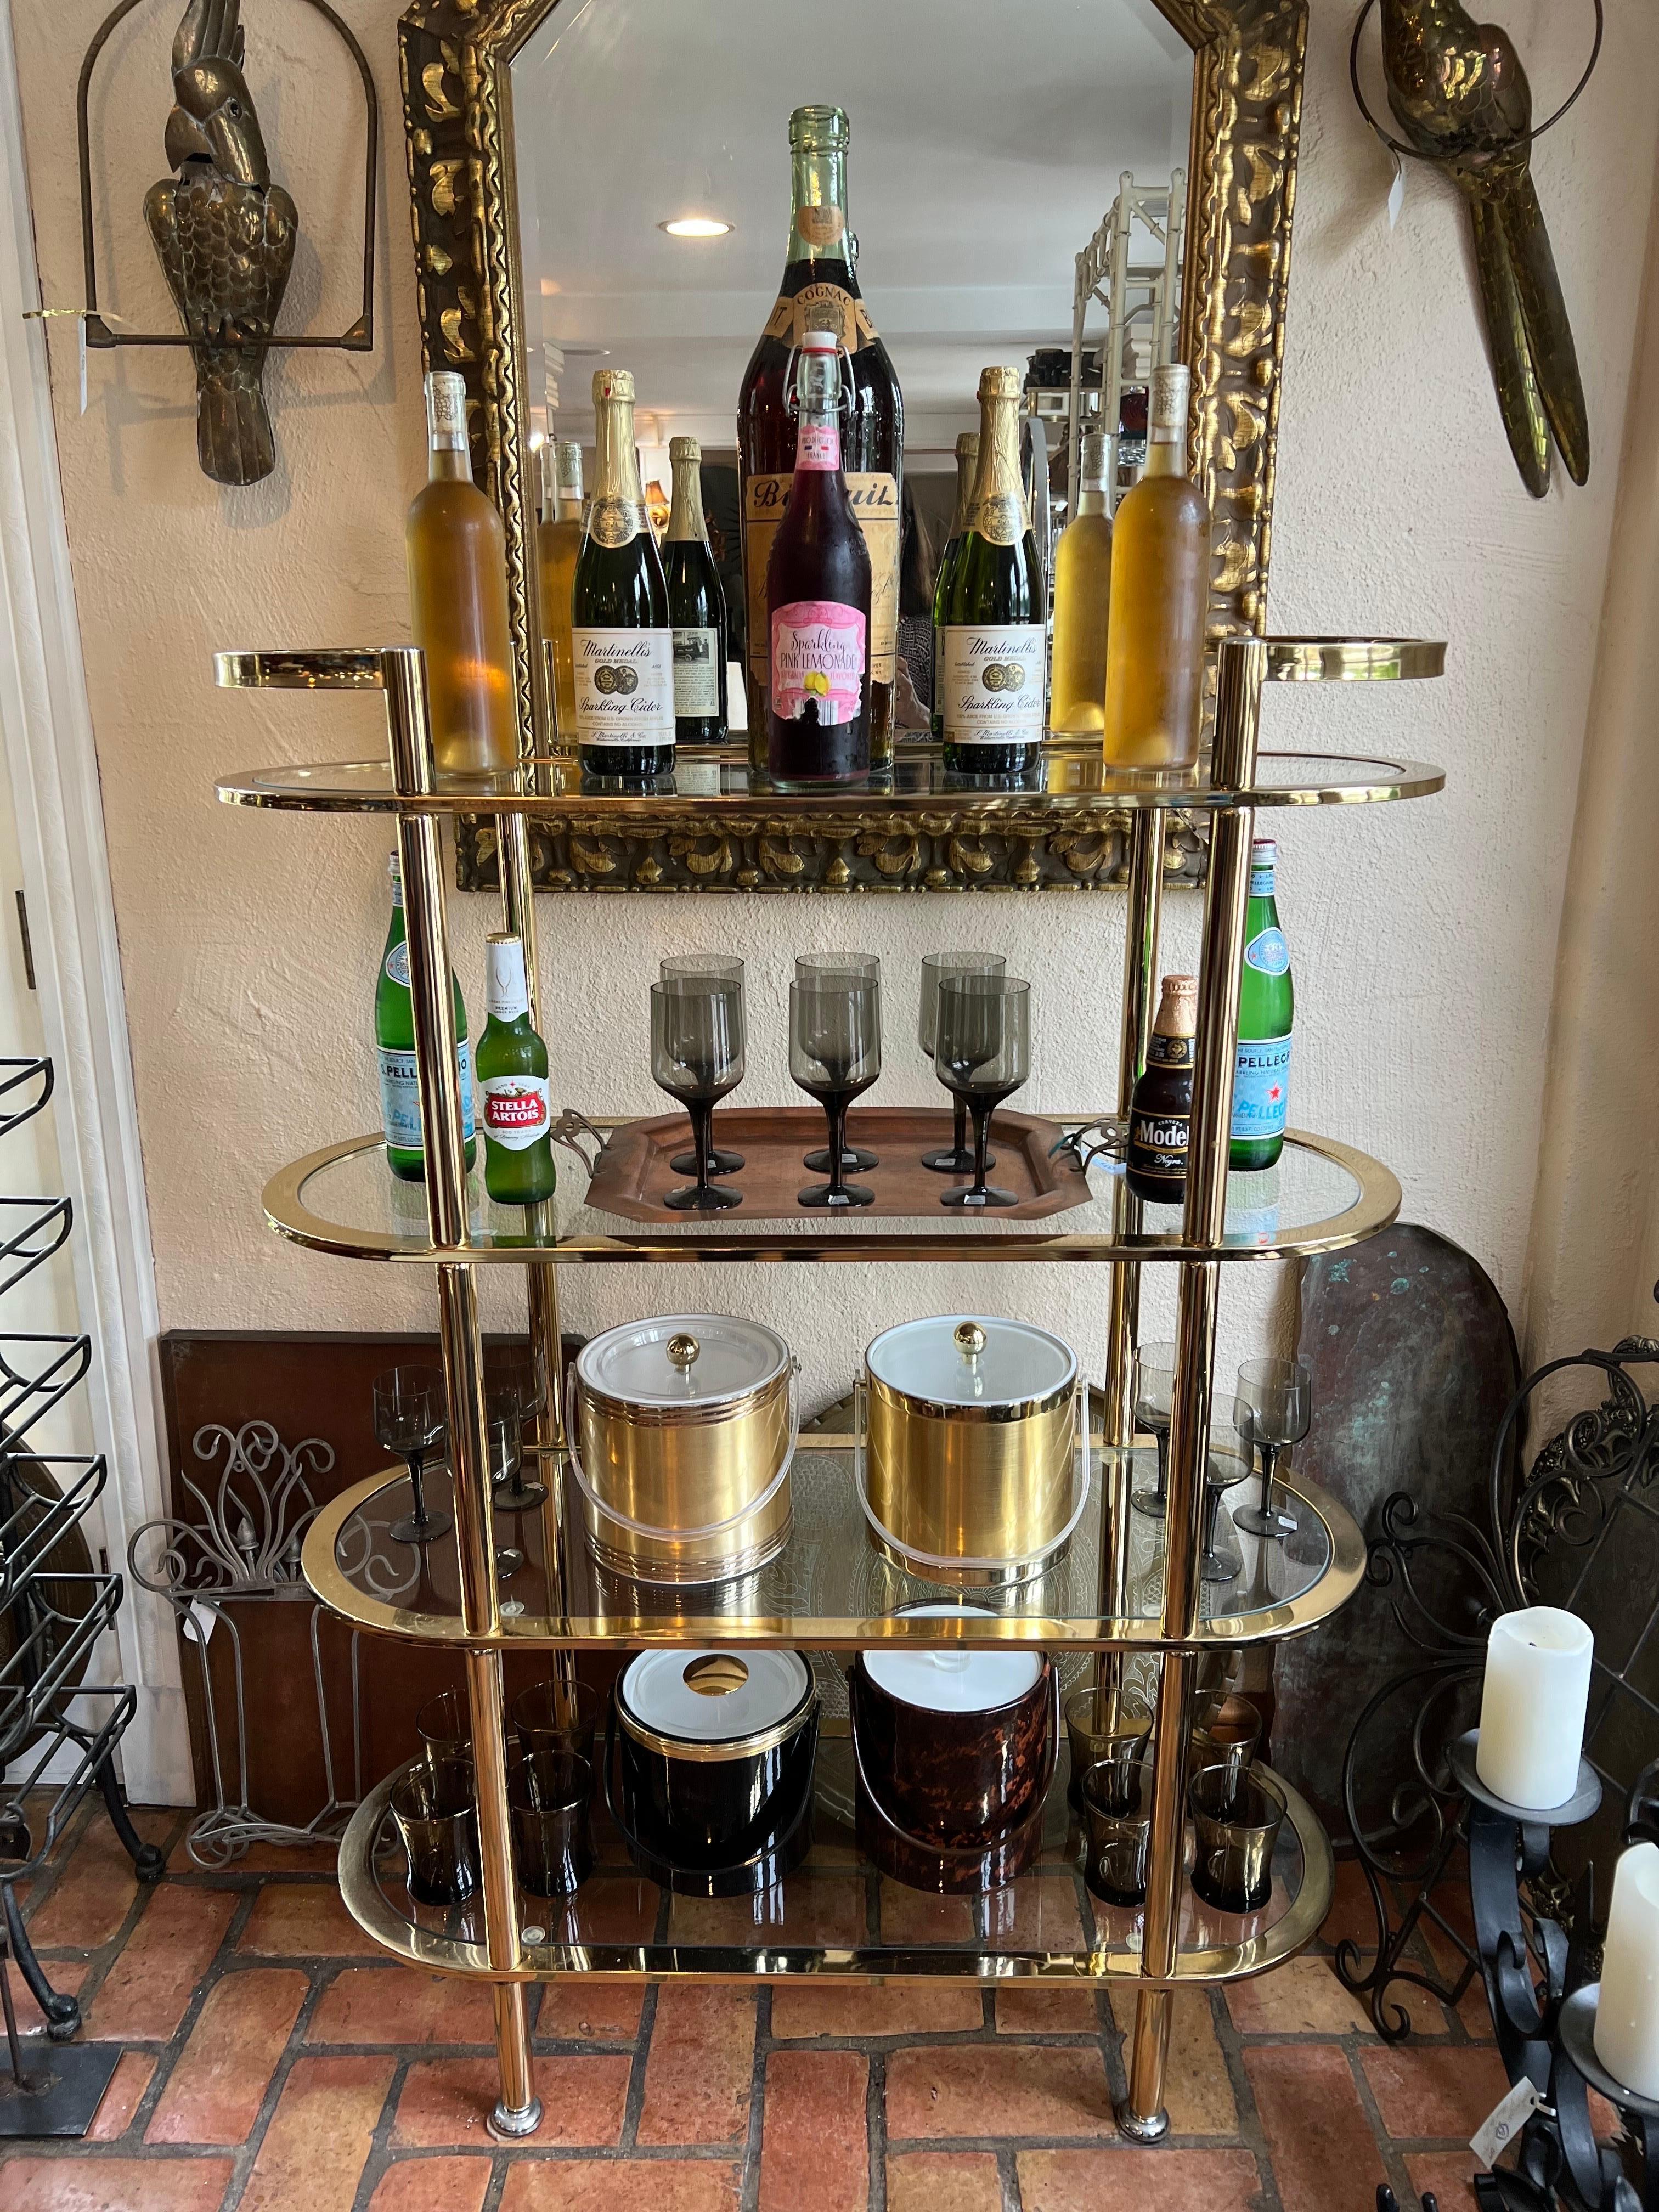 Hollywood Regency tall tiered bar cart/etagere. A stunning brass and glass four tiered bar cart that could also function as a mid size etagere. Chrome accents on feet and handle tops. Versatile, stylish and a beautiful addition to any home. Could